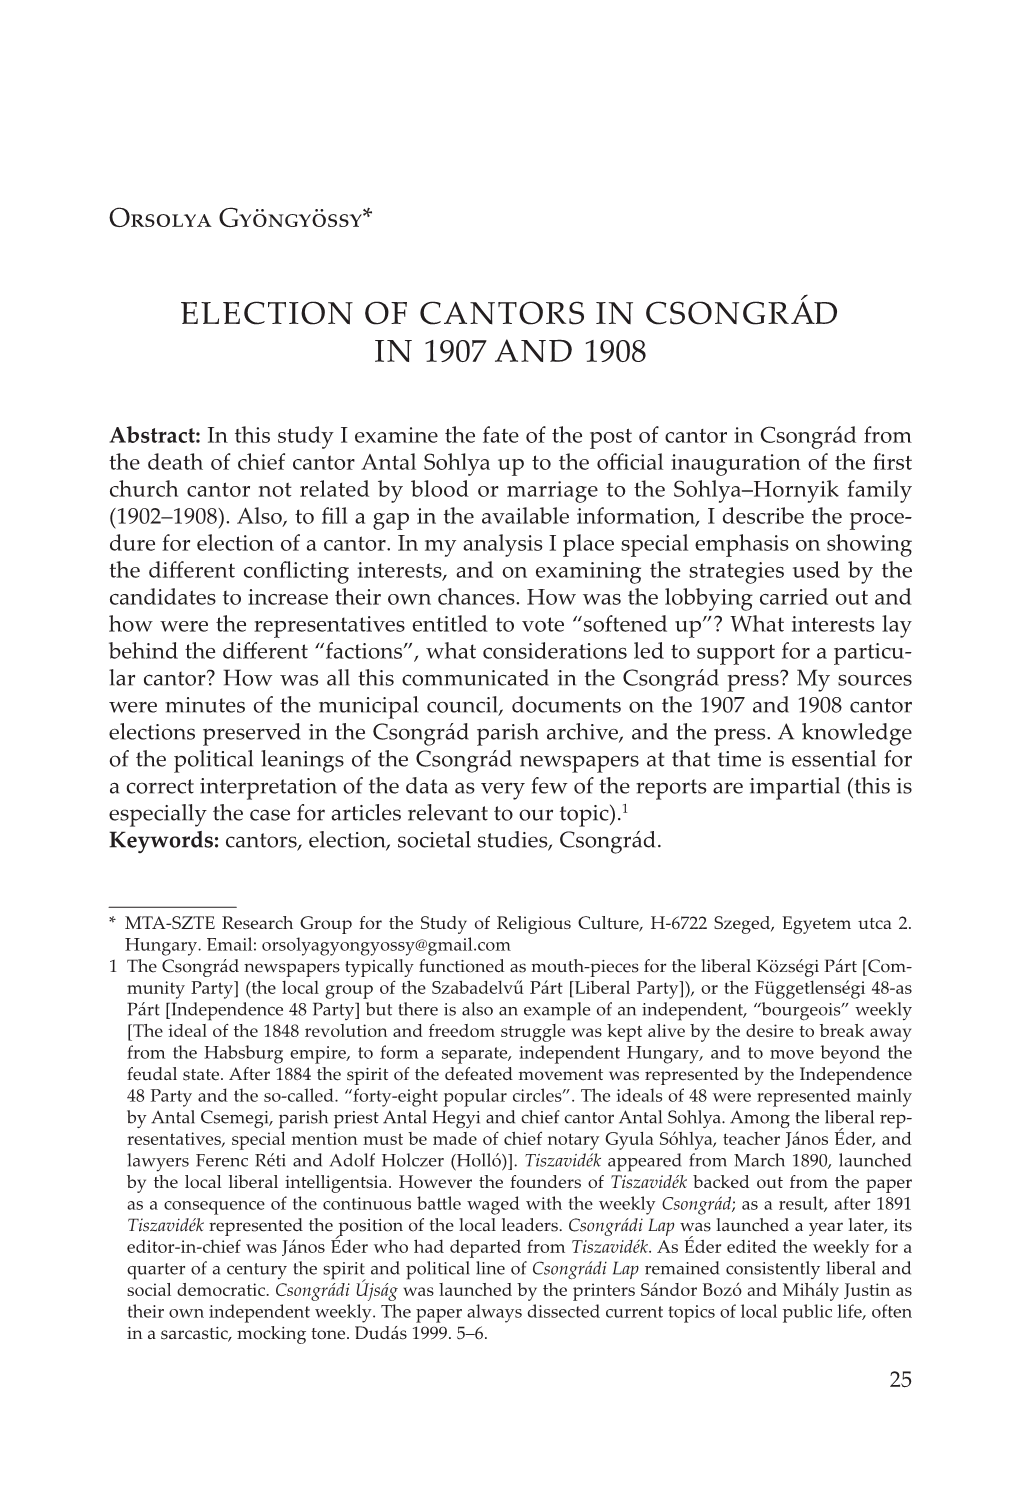 Election of Cantors in Csongrád in 1907 and 1908